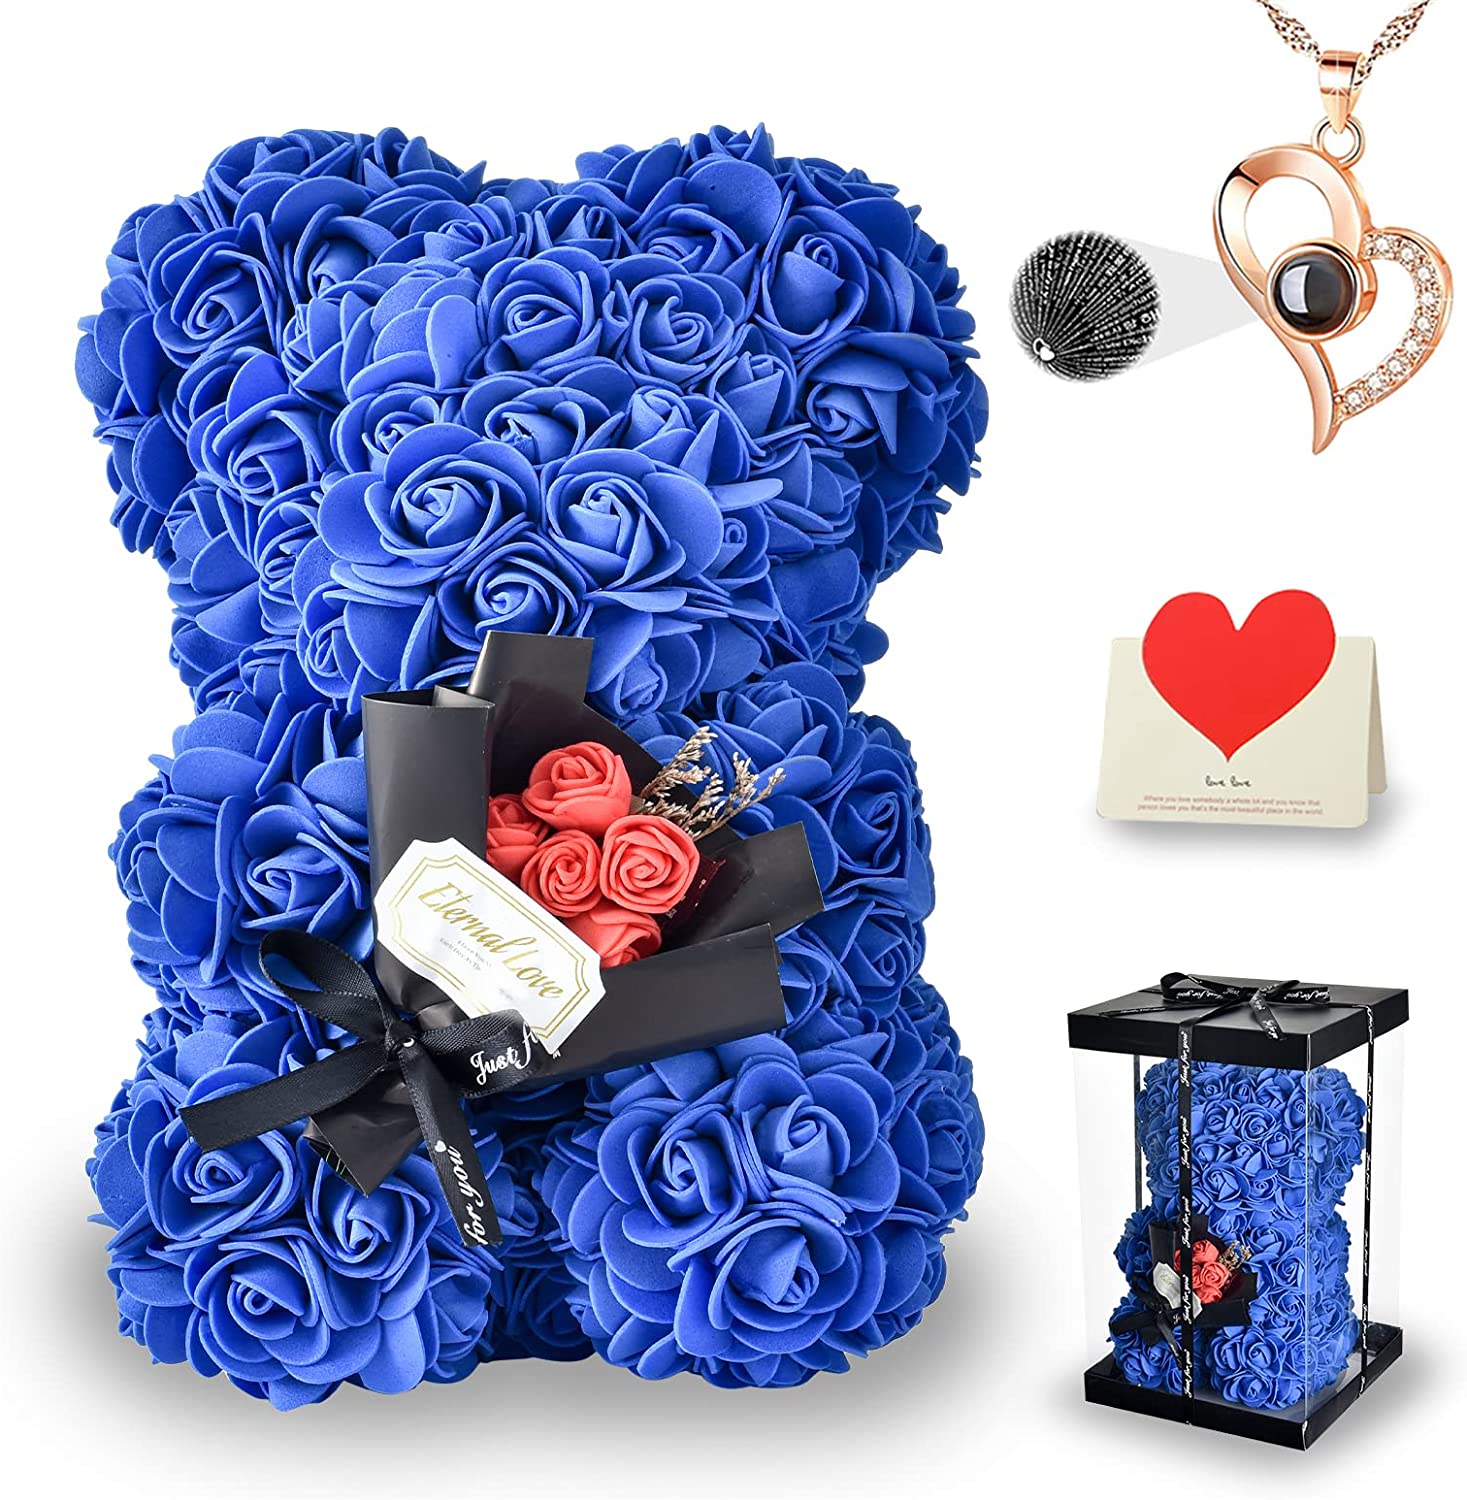 ME & YOU Love Gifts I Love You Heart Teddy with I Love You Card and Rose  for Girlfriend, Wife on Valentine's Day : Amazon.in: Home & Kitchen